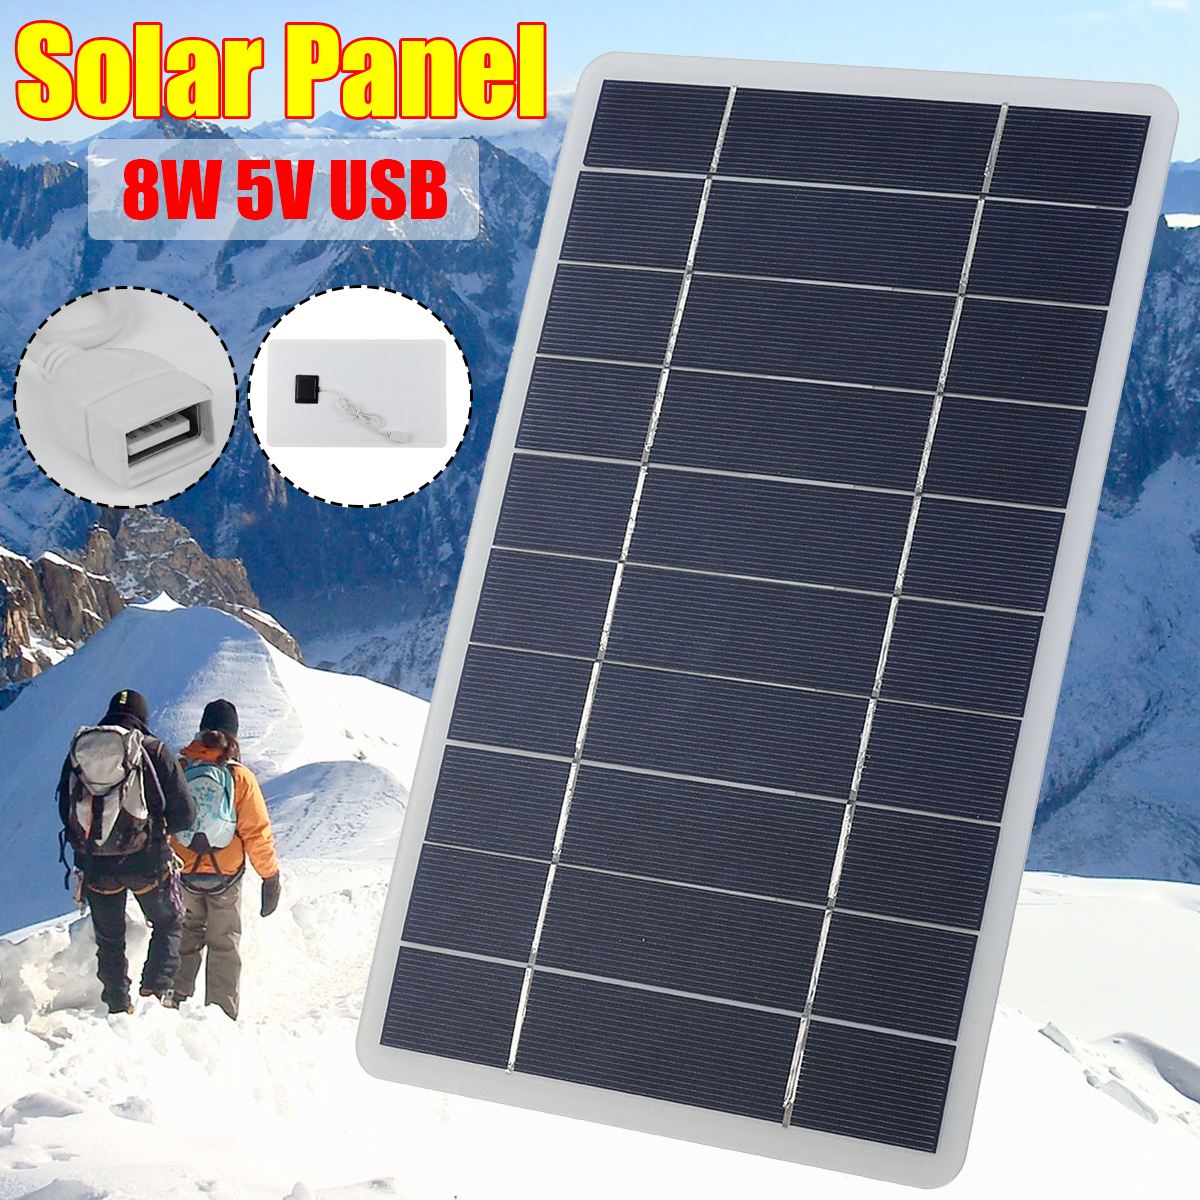 8W-5V-USB-Monocrystalline-Silicon-Solar-Panel-Phone-Car-USB-Battery-Outdoor-Charger-1873505-2